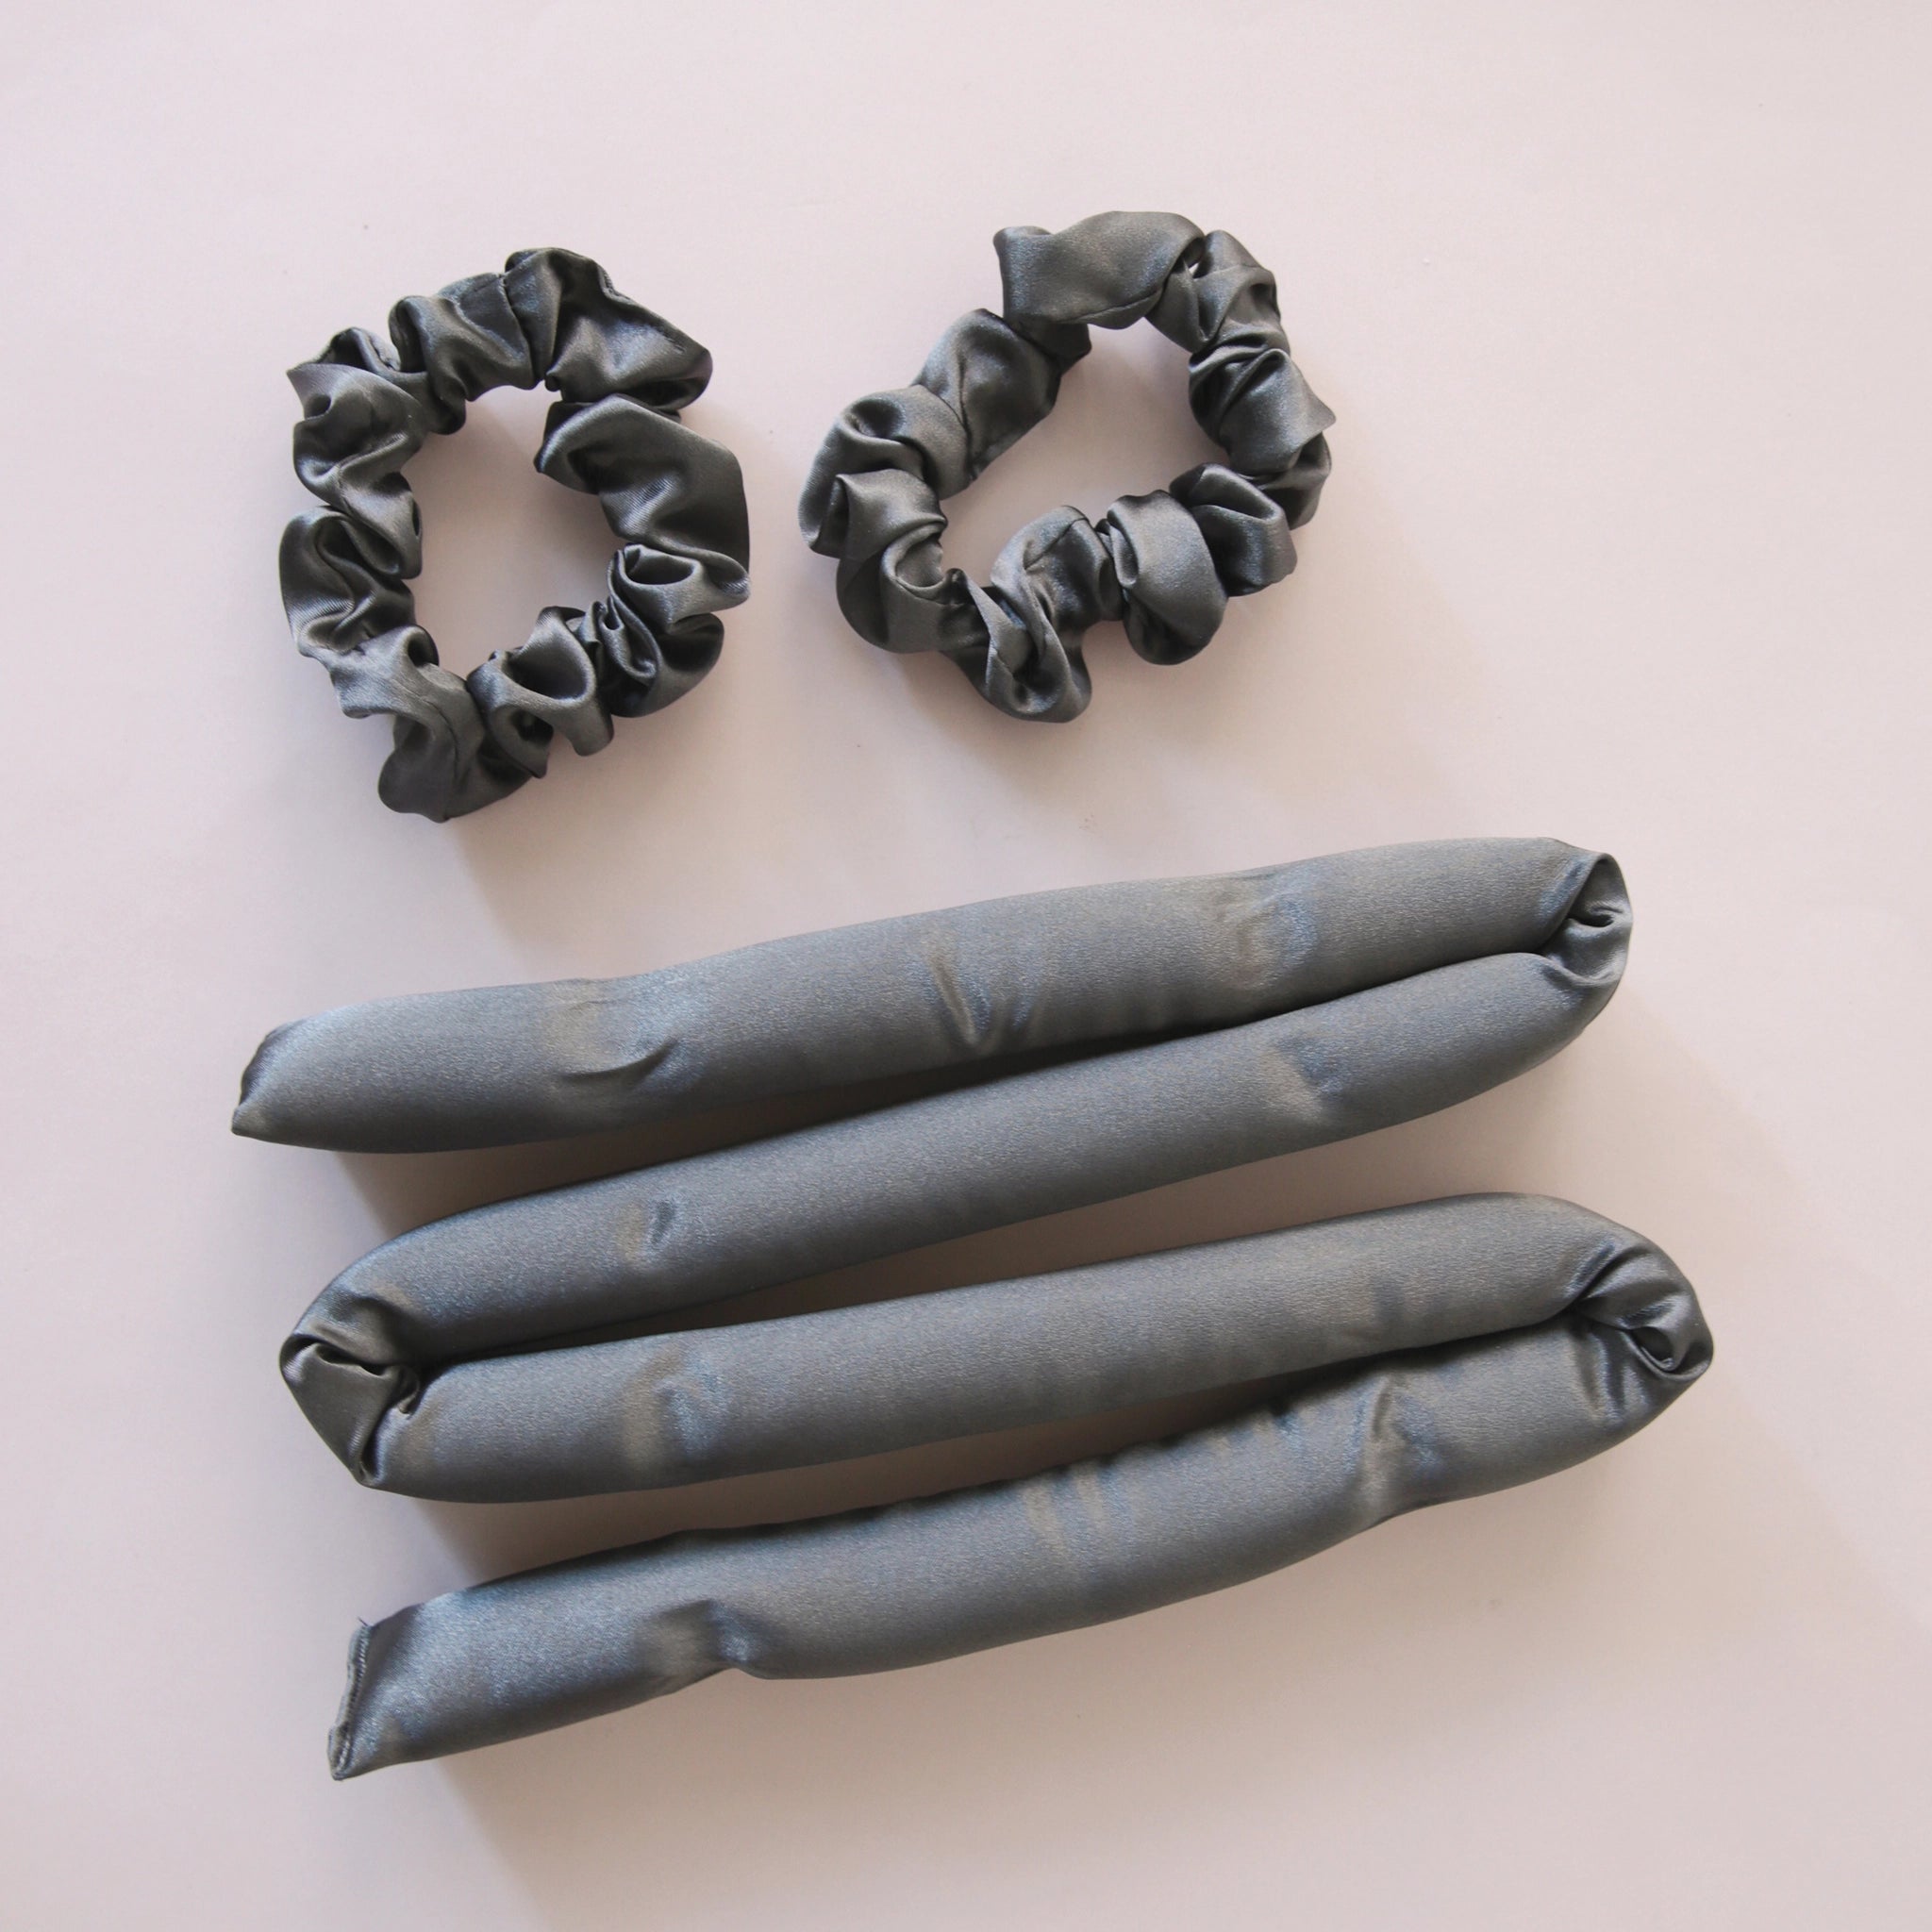 A black satin heatless curler with two included scrunchies.